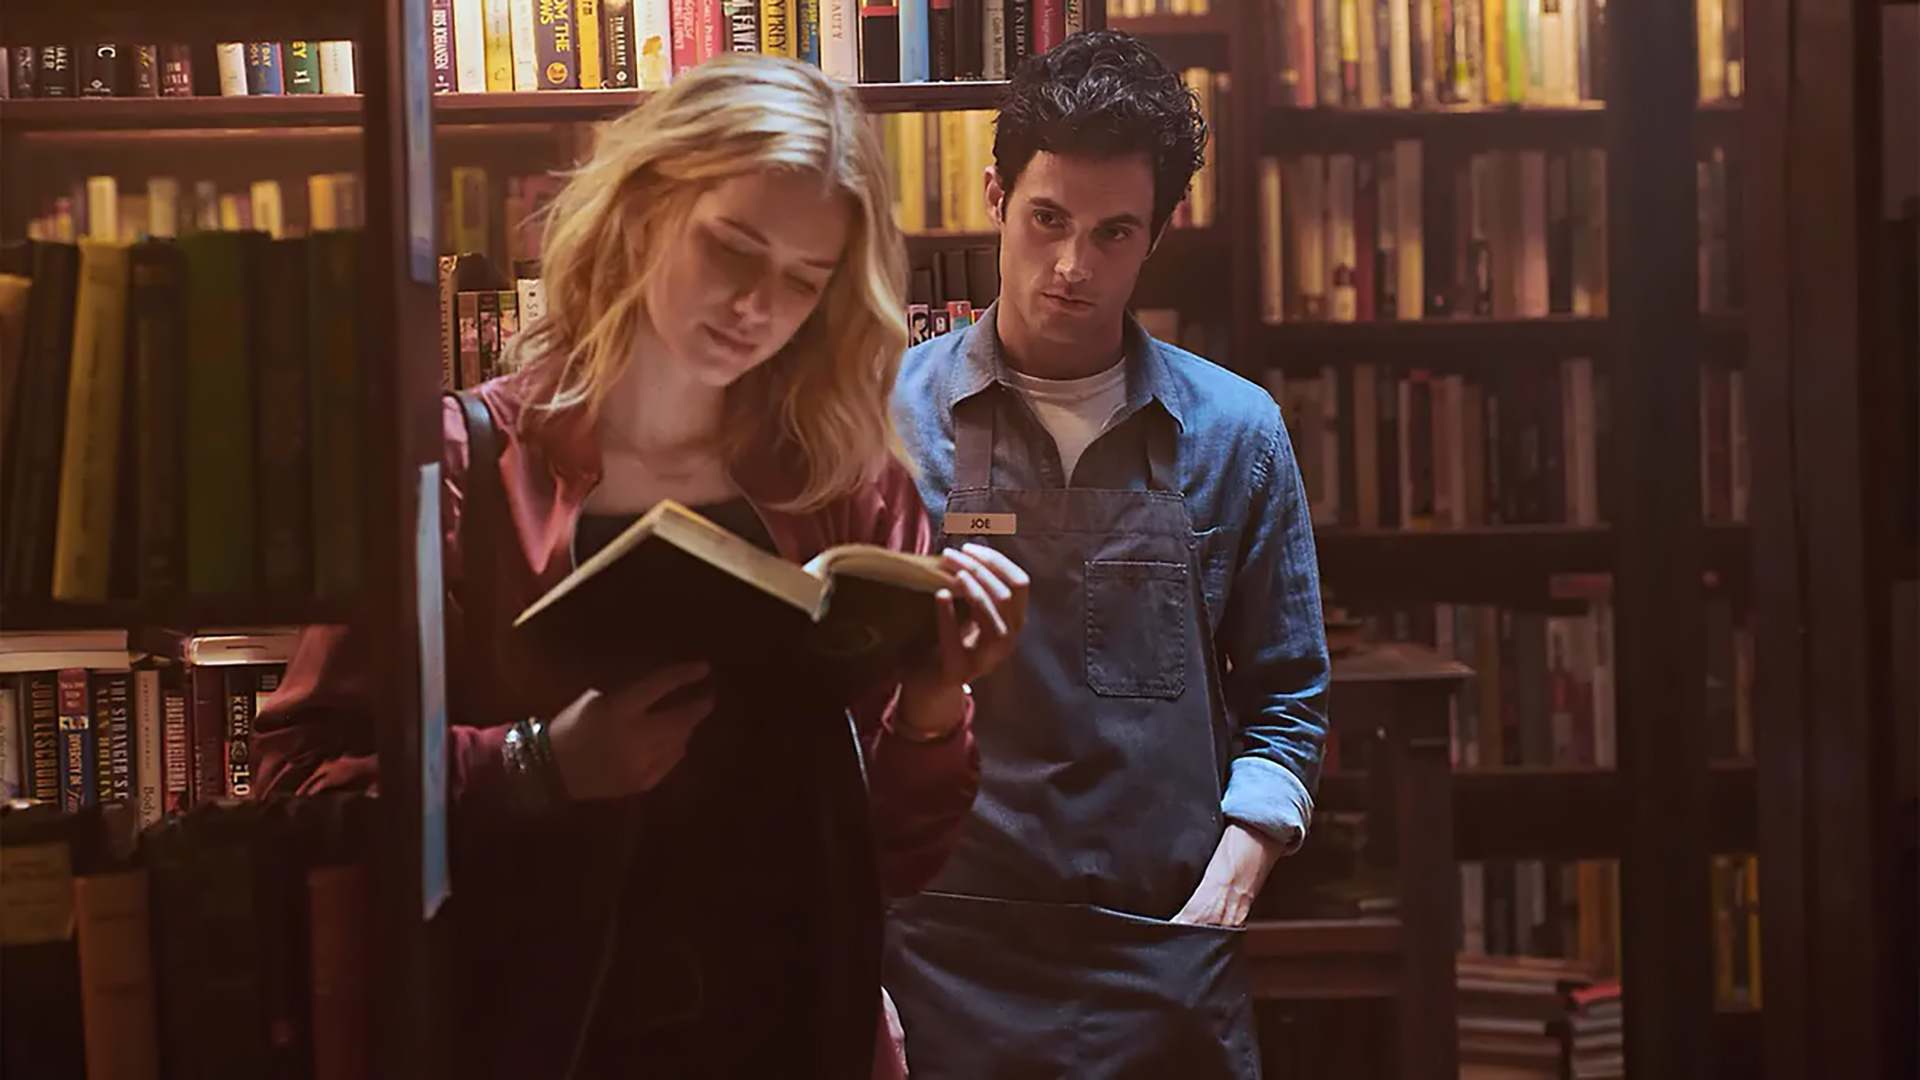 7 TV Shows You Might Not Have Realized Were Based On Books